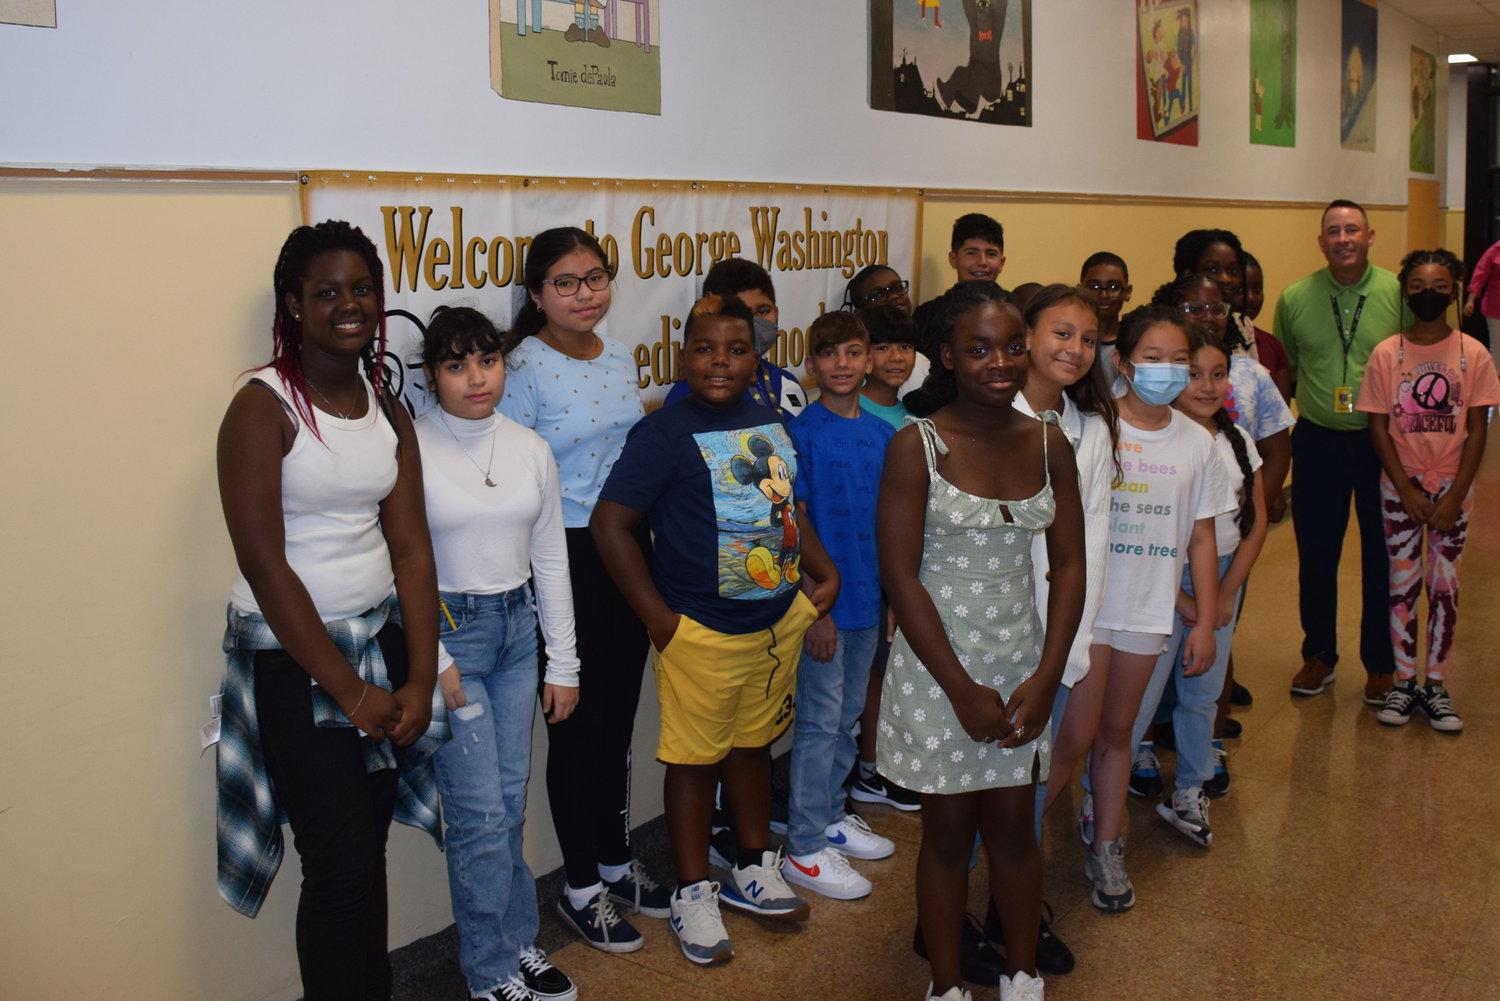 Students and teachers at George Washington School were eager to reconnect at the start of the new school year.